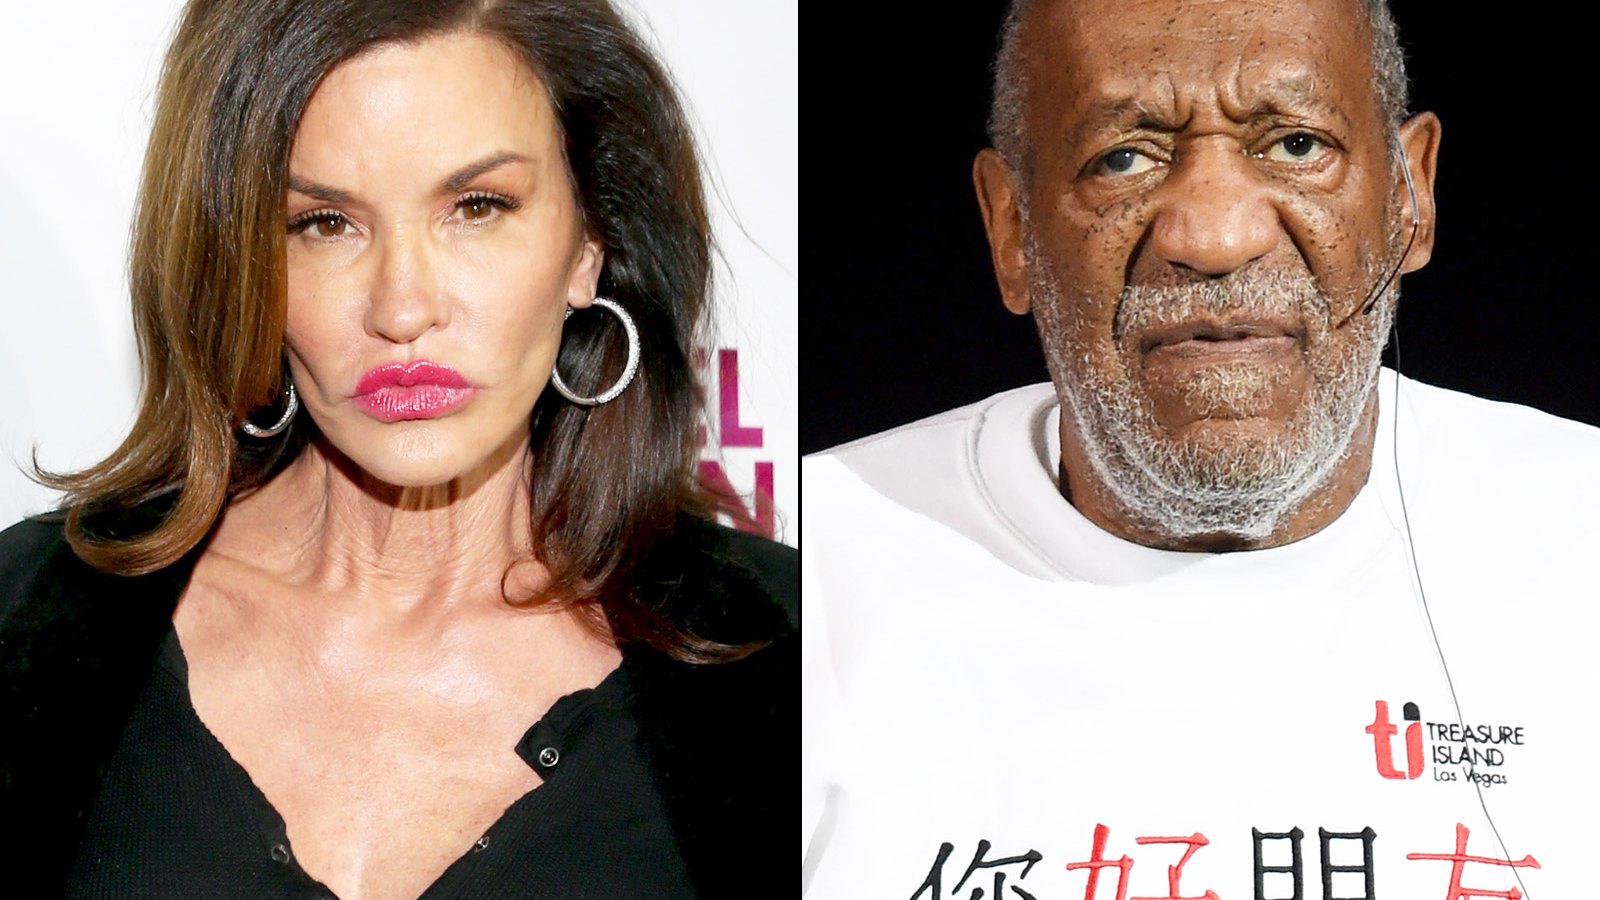 Janice Dickinson and Bill Cosby